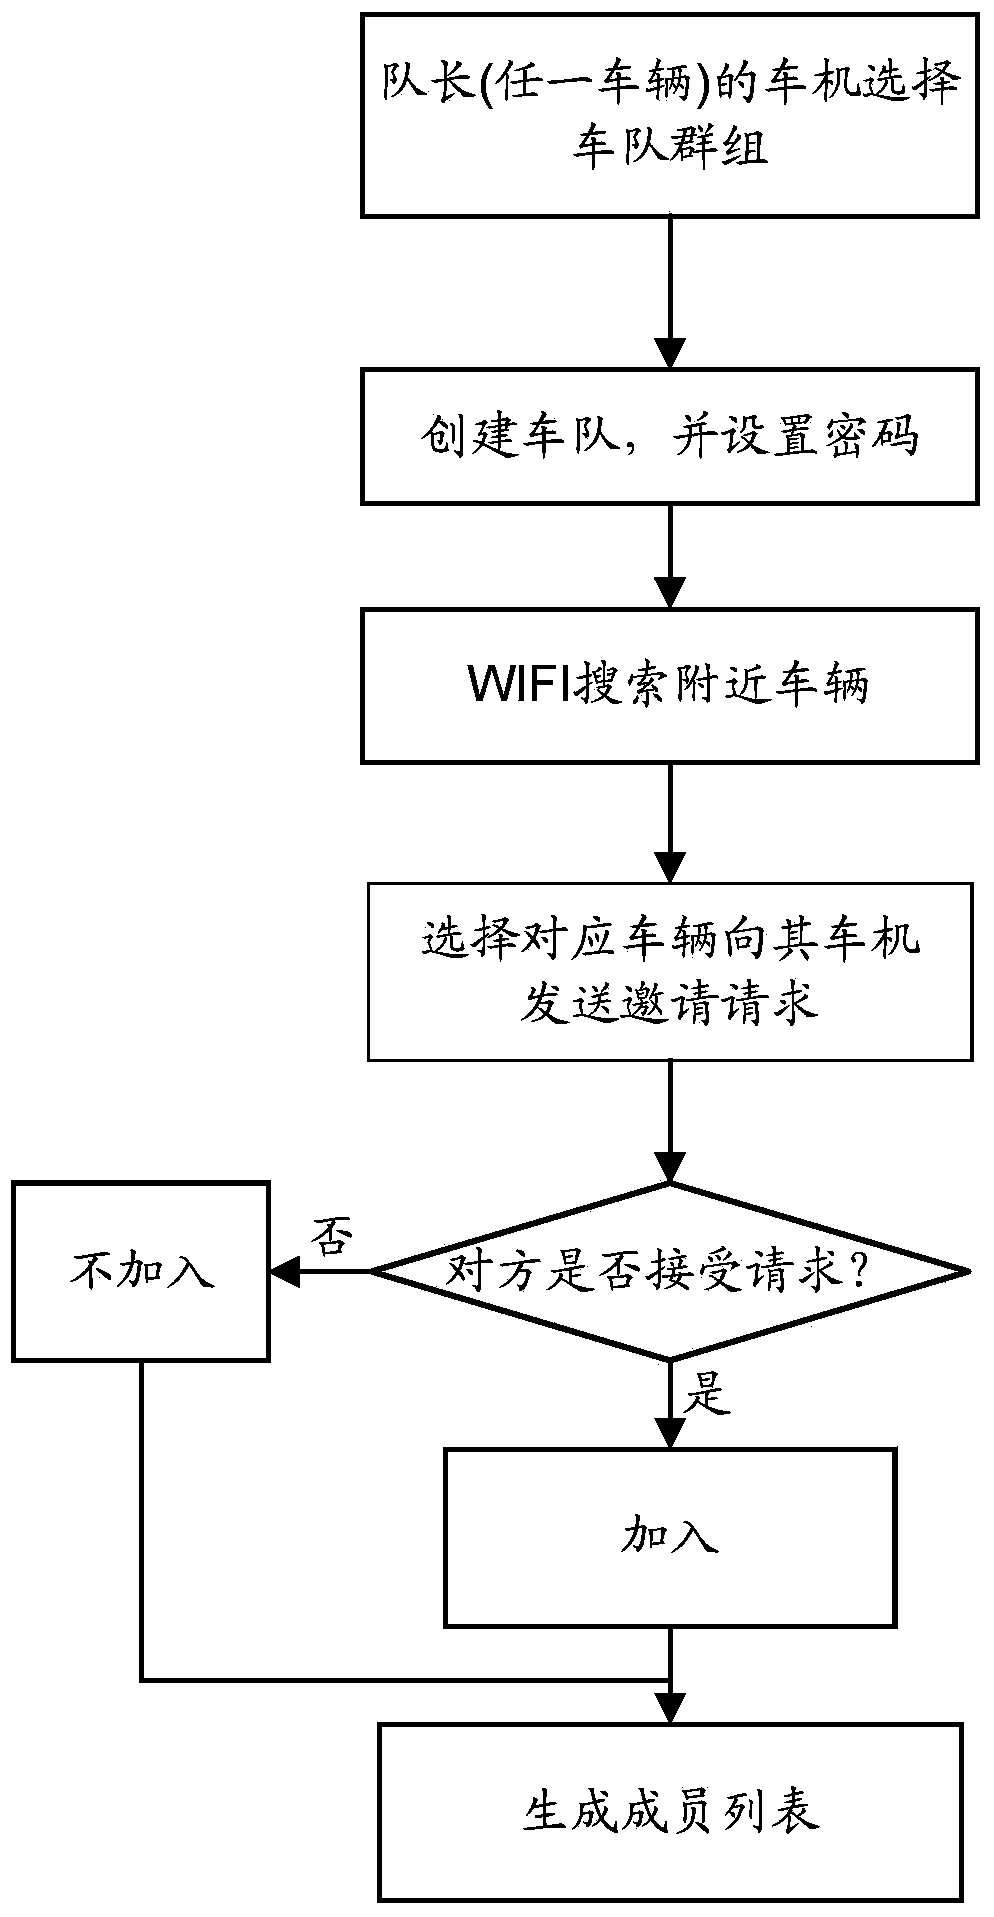 Vehicle networking communication system and method thereof